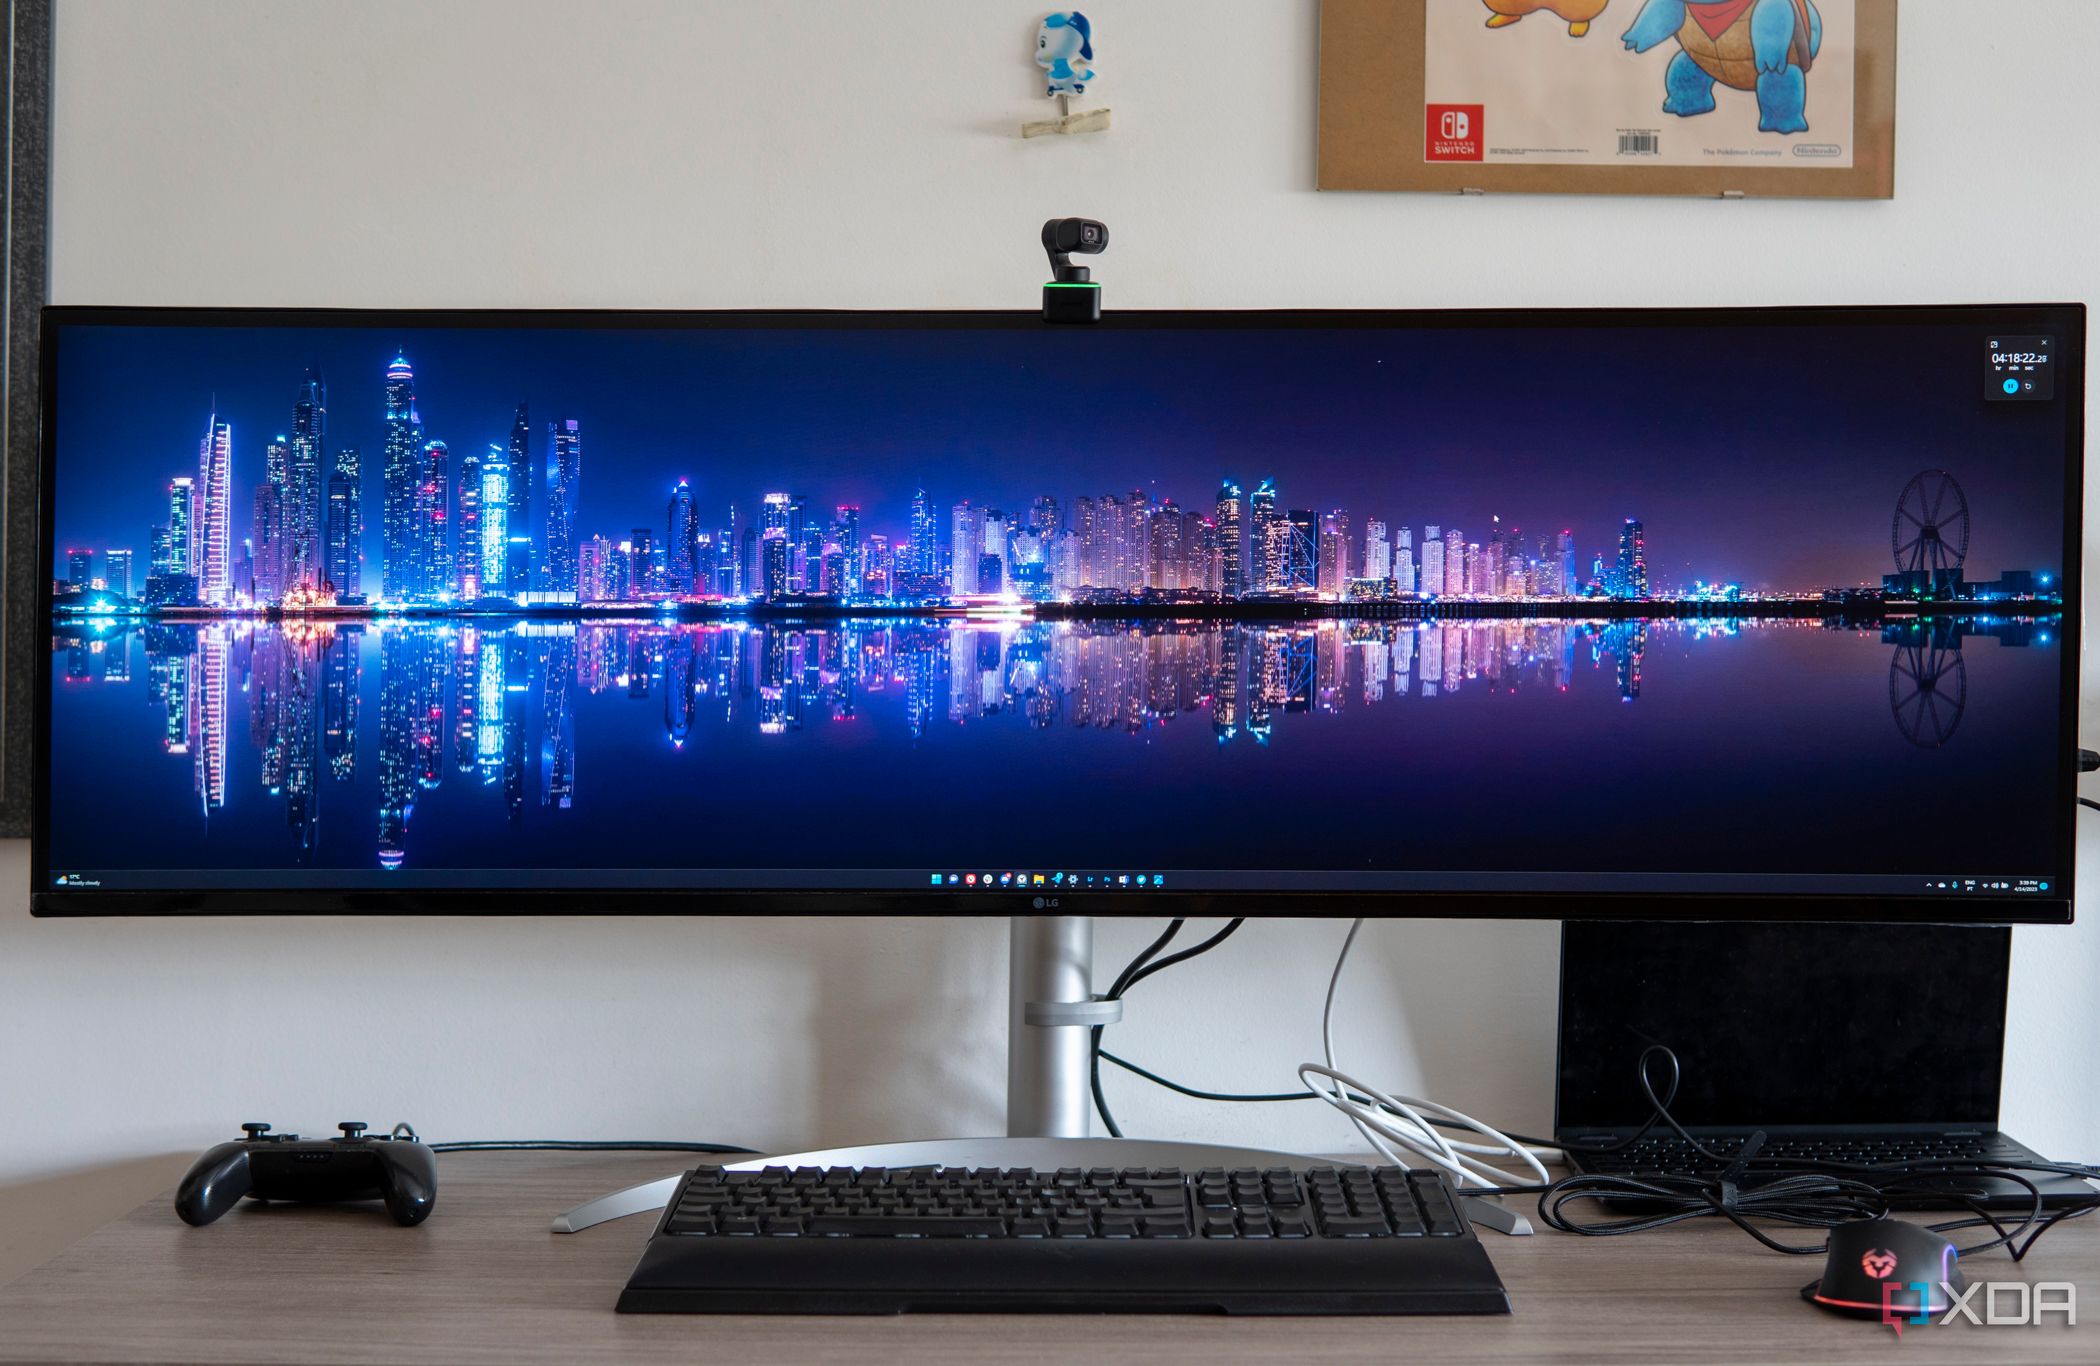 LG's latest ultrawide monitors are more affordable